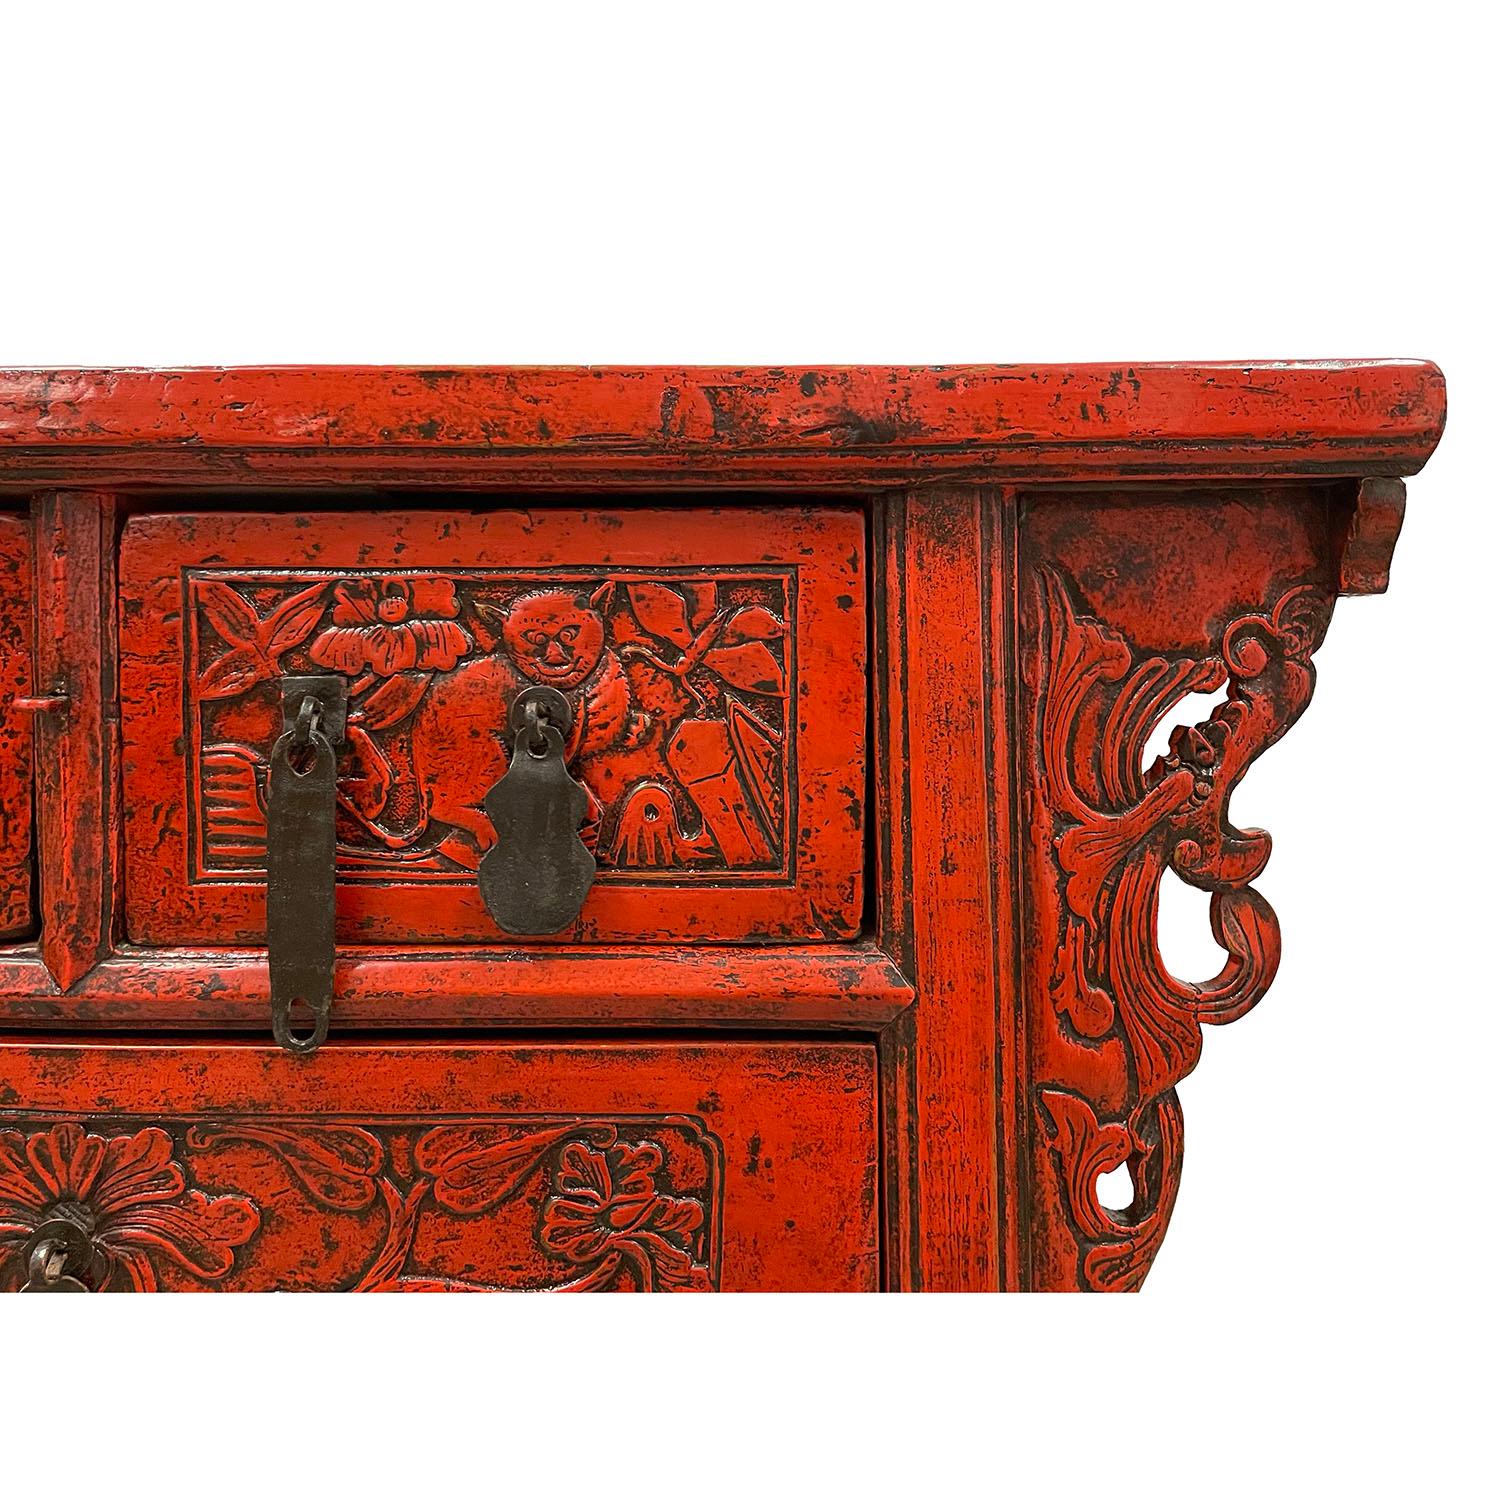 19th Century Antique Chinese Carved Red Lacquer Console Table / Sideboard In Good Condition For Sale In Pomona, CA